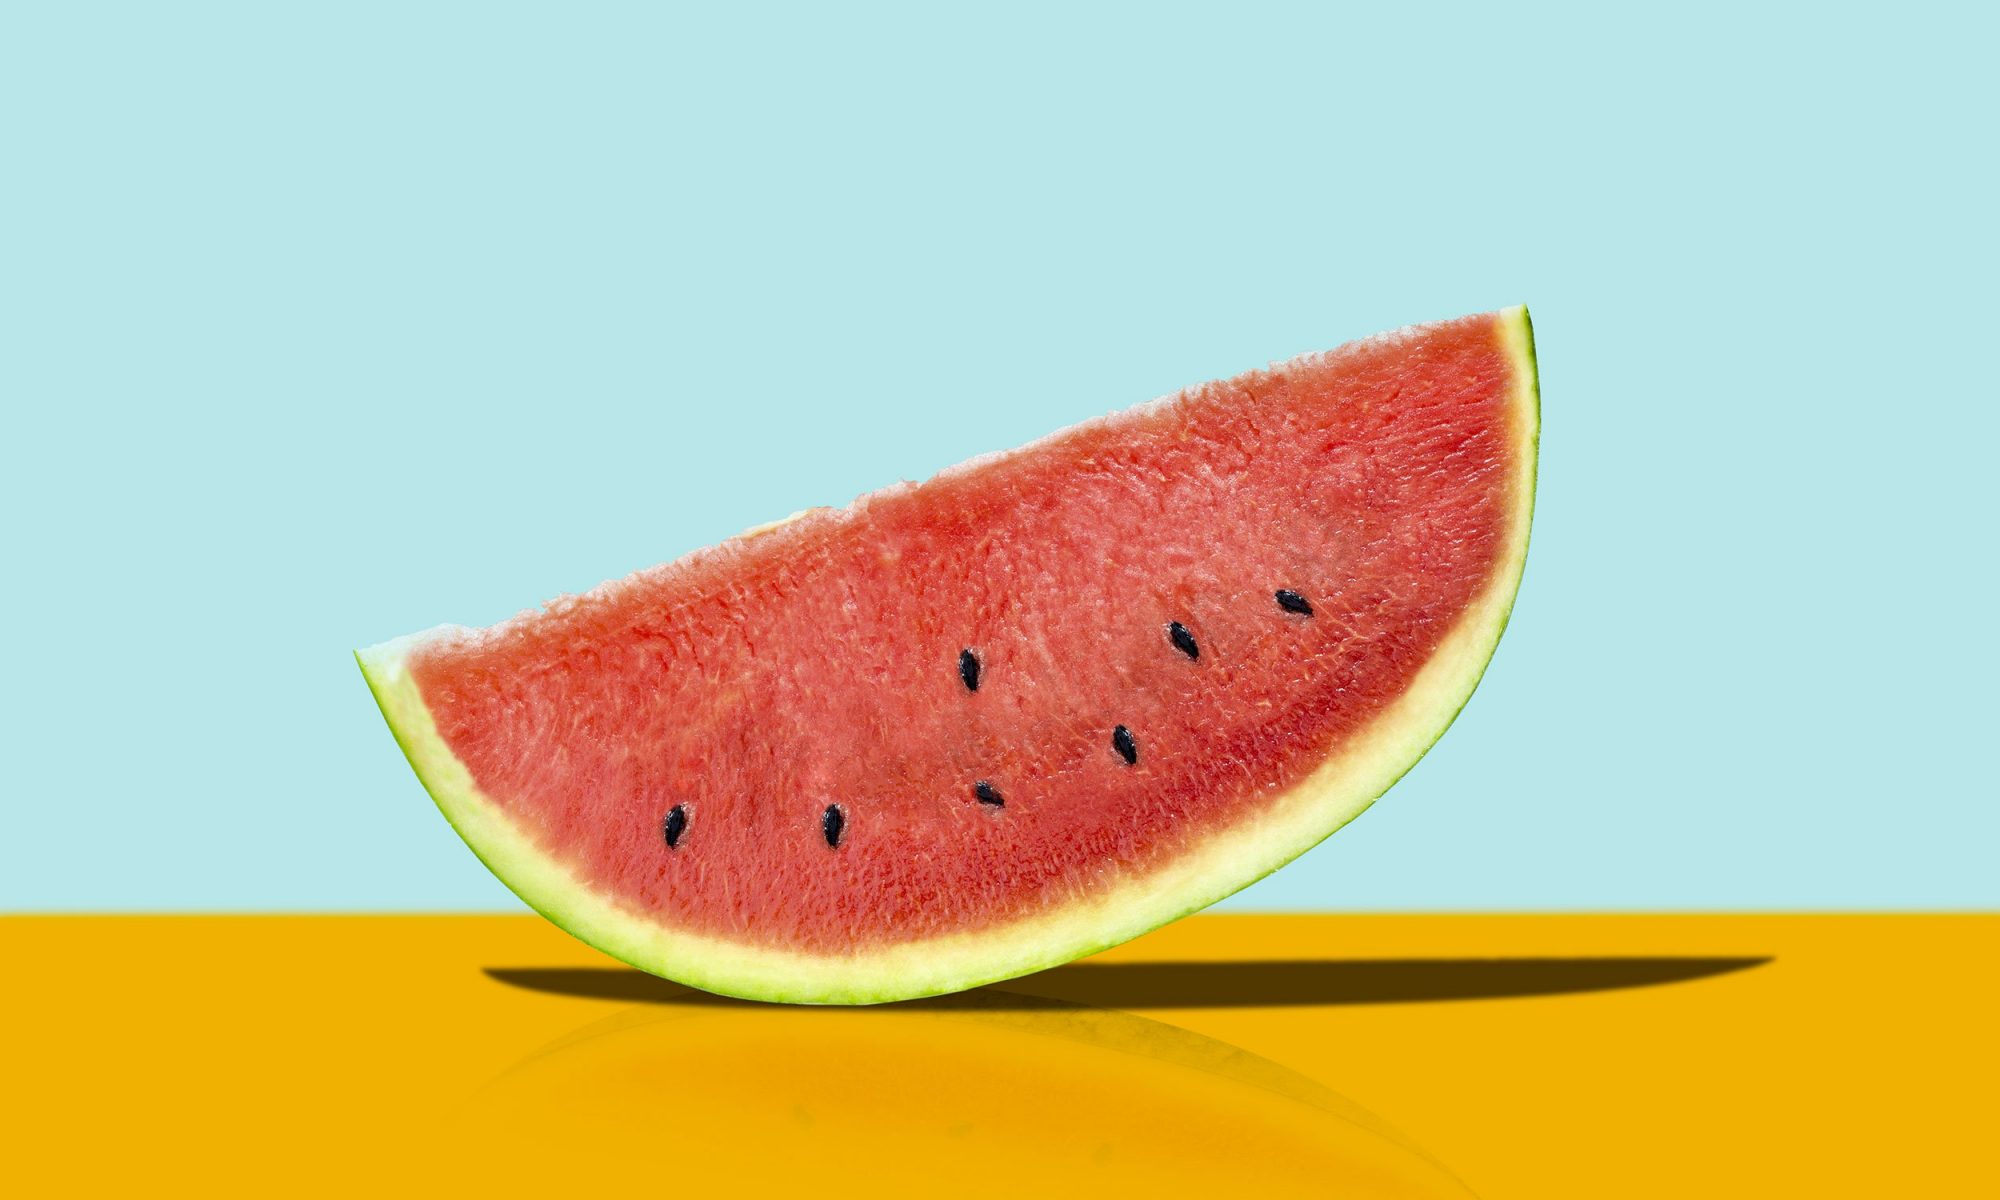 How Long Does Watermelon Last?